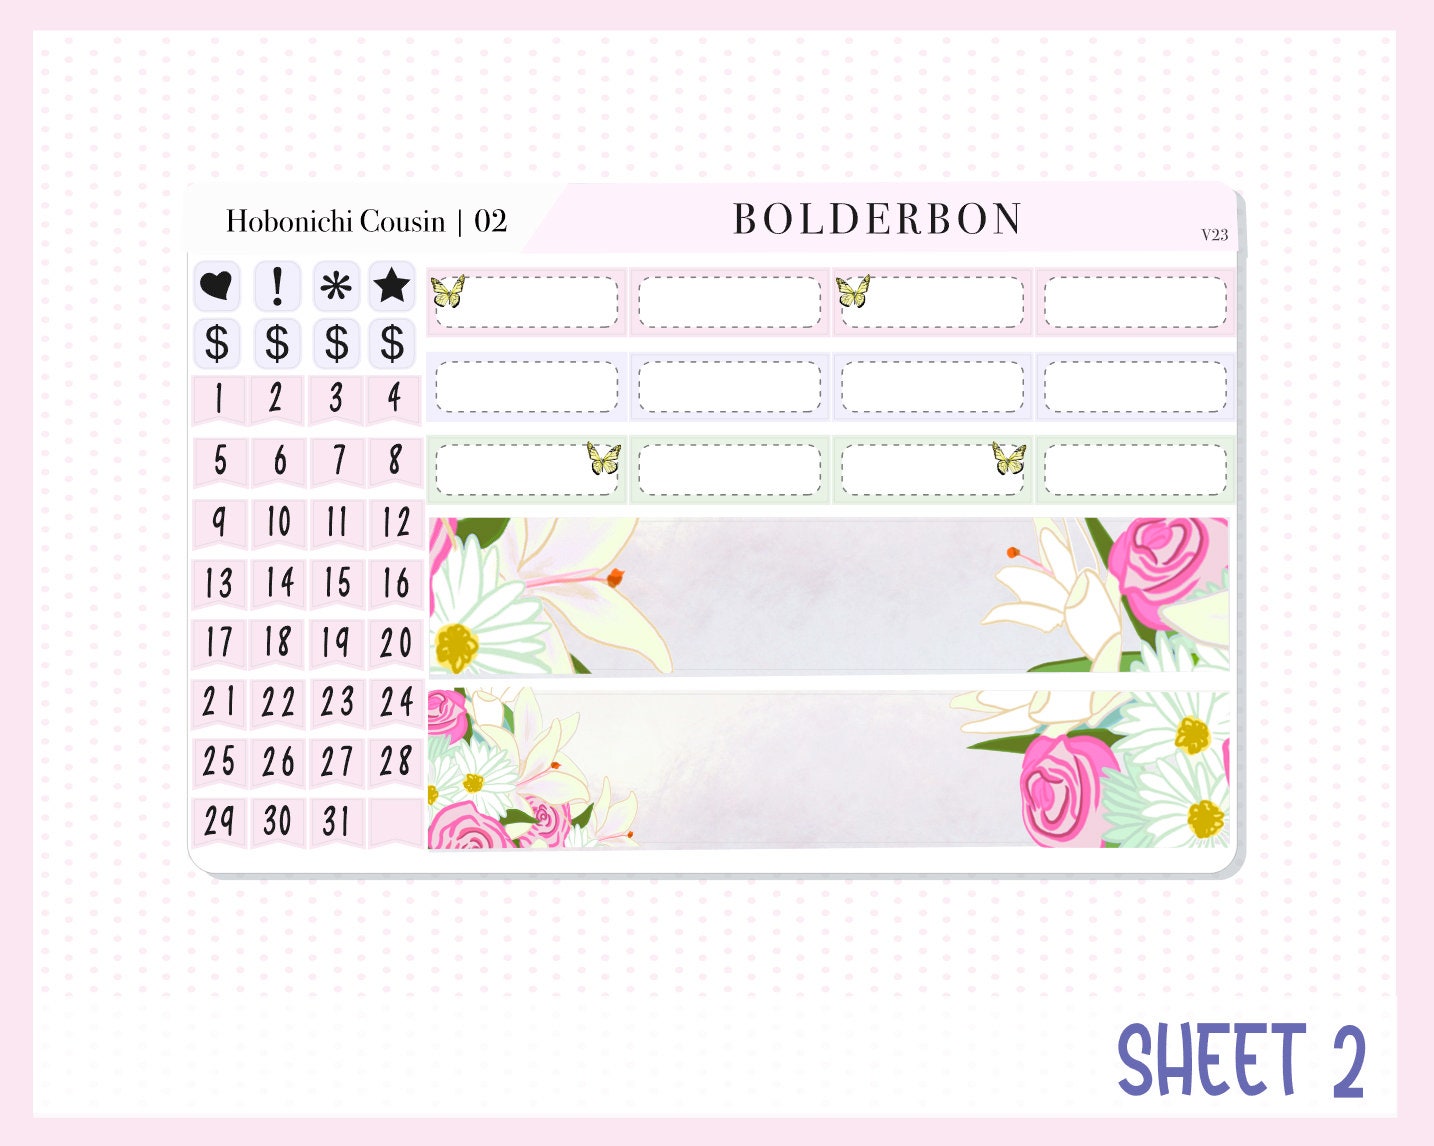 MAY Hobonichi Cousin and A5 Day Free || Monthly Planner Sticker Kit, Flowers, Spring, Mothers Day